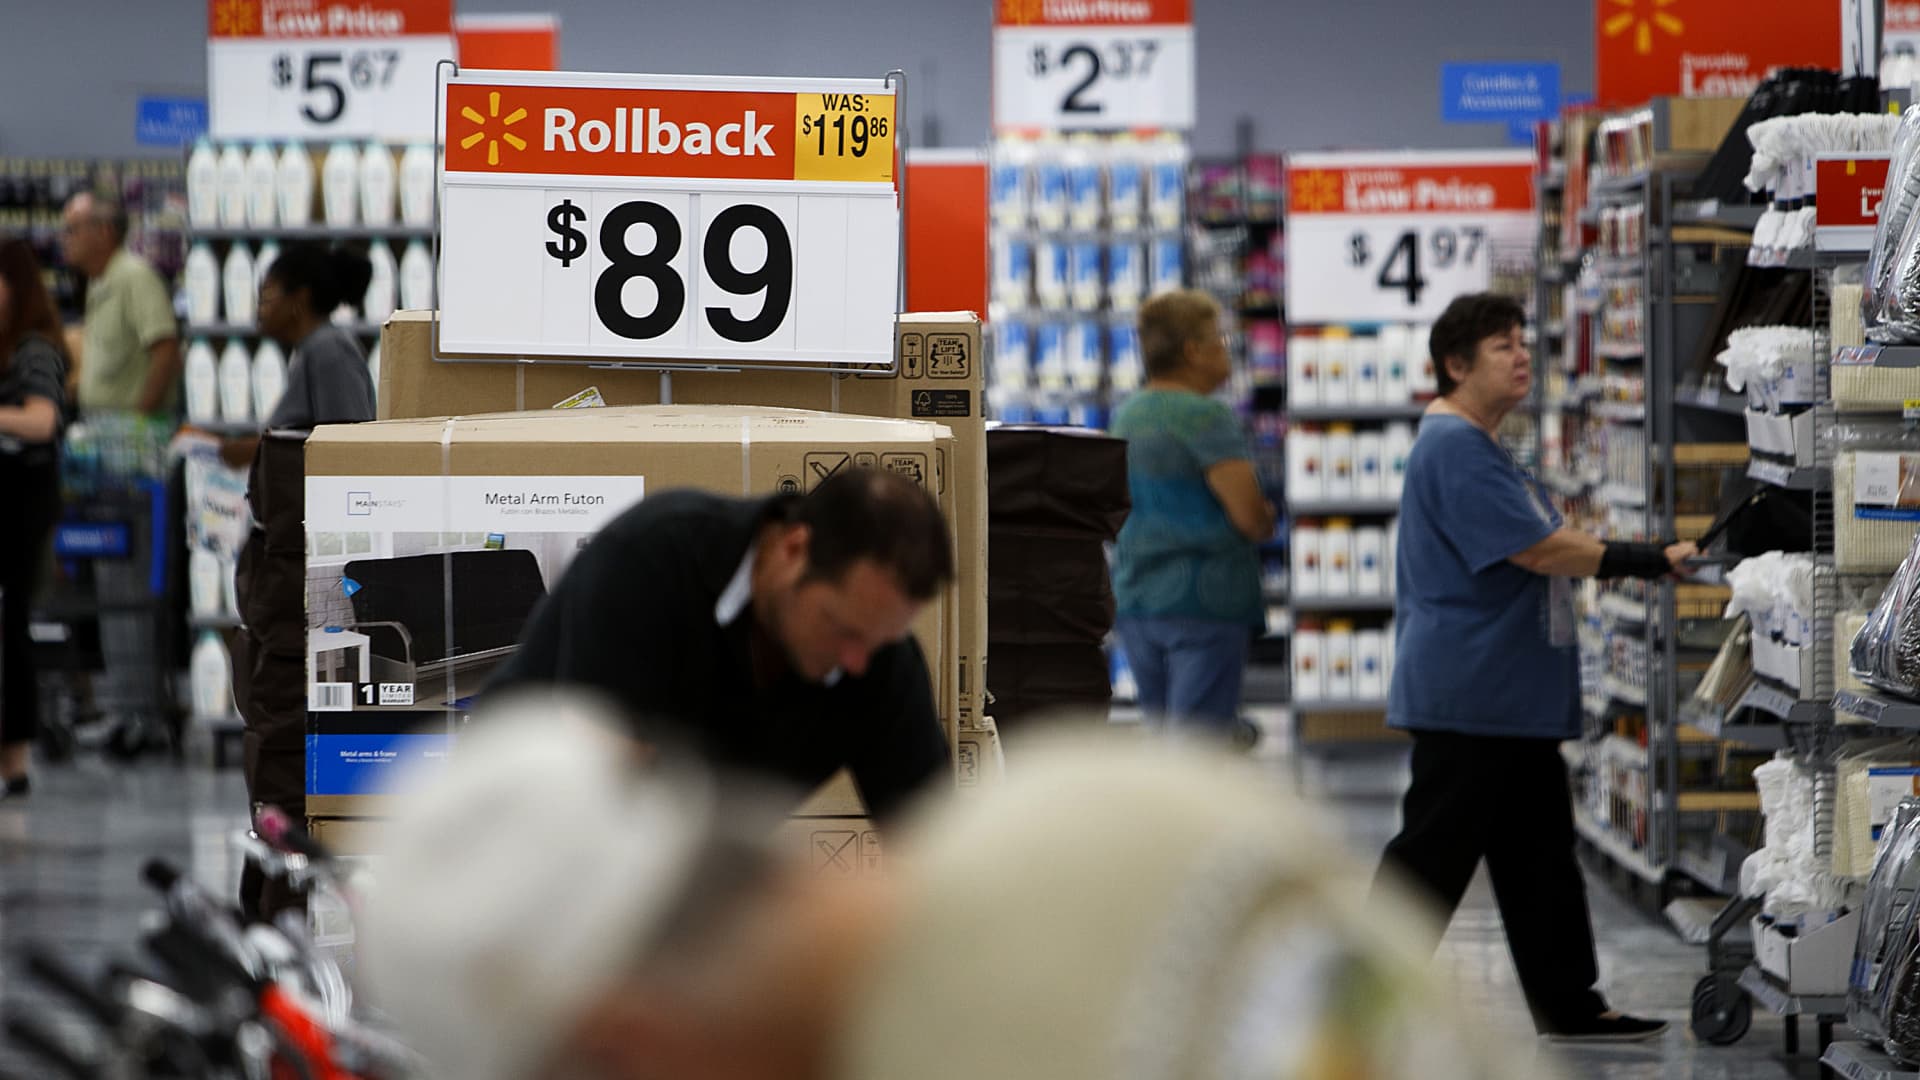 Walmart won't hold rival event to Amazon Prime Day, as it is already offering big markdowns